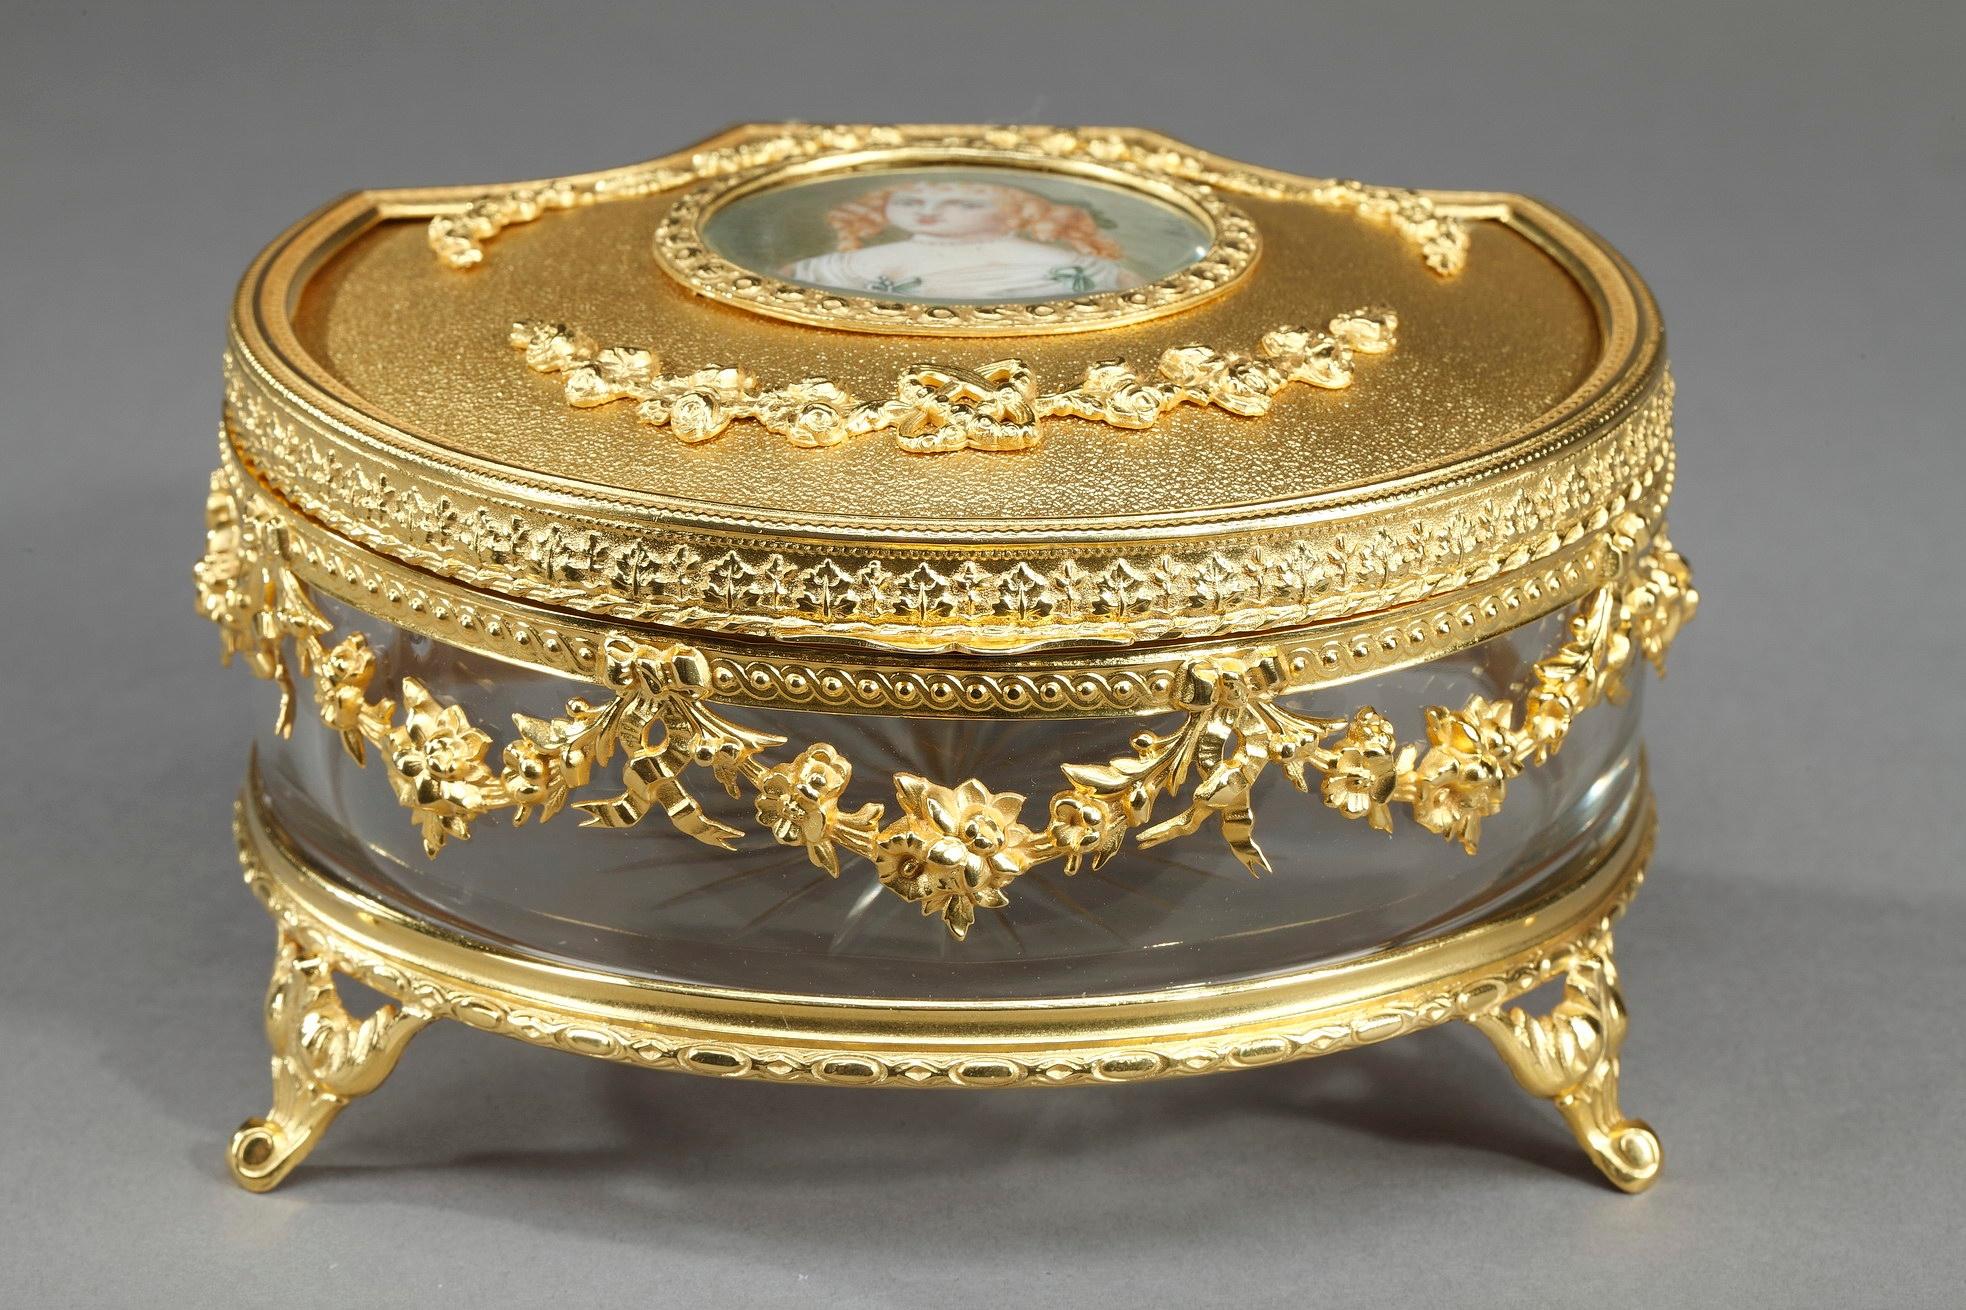 Louis-Philippe jewelry box crafted of crystal and gilt bronze. The ormolu lid chiseled with garlands of roses, is decorated with a miniature featuring Madame de Sévigné. Marie de Rabutin-Chantal, marquise de Sévigné (1626-1696) was a French